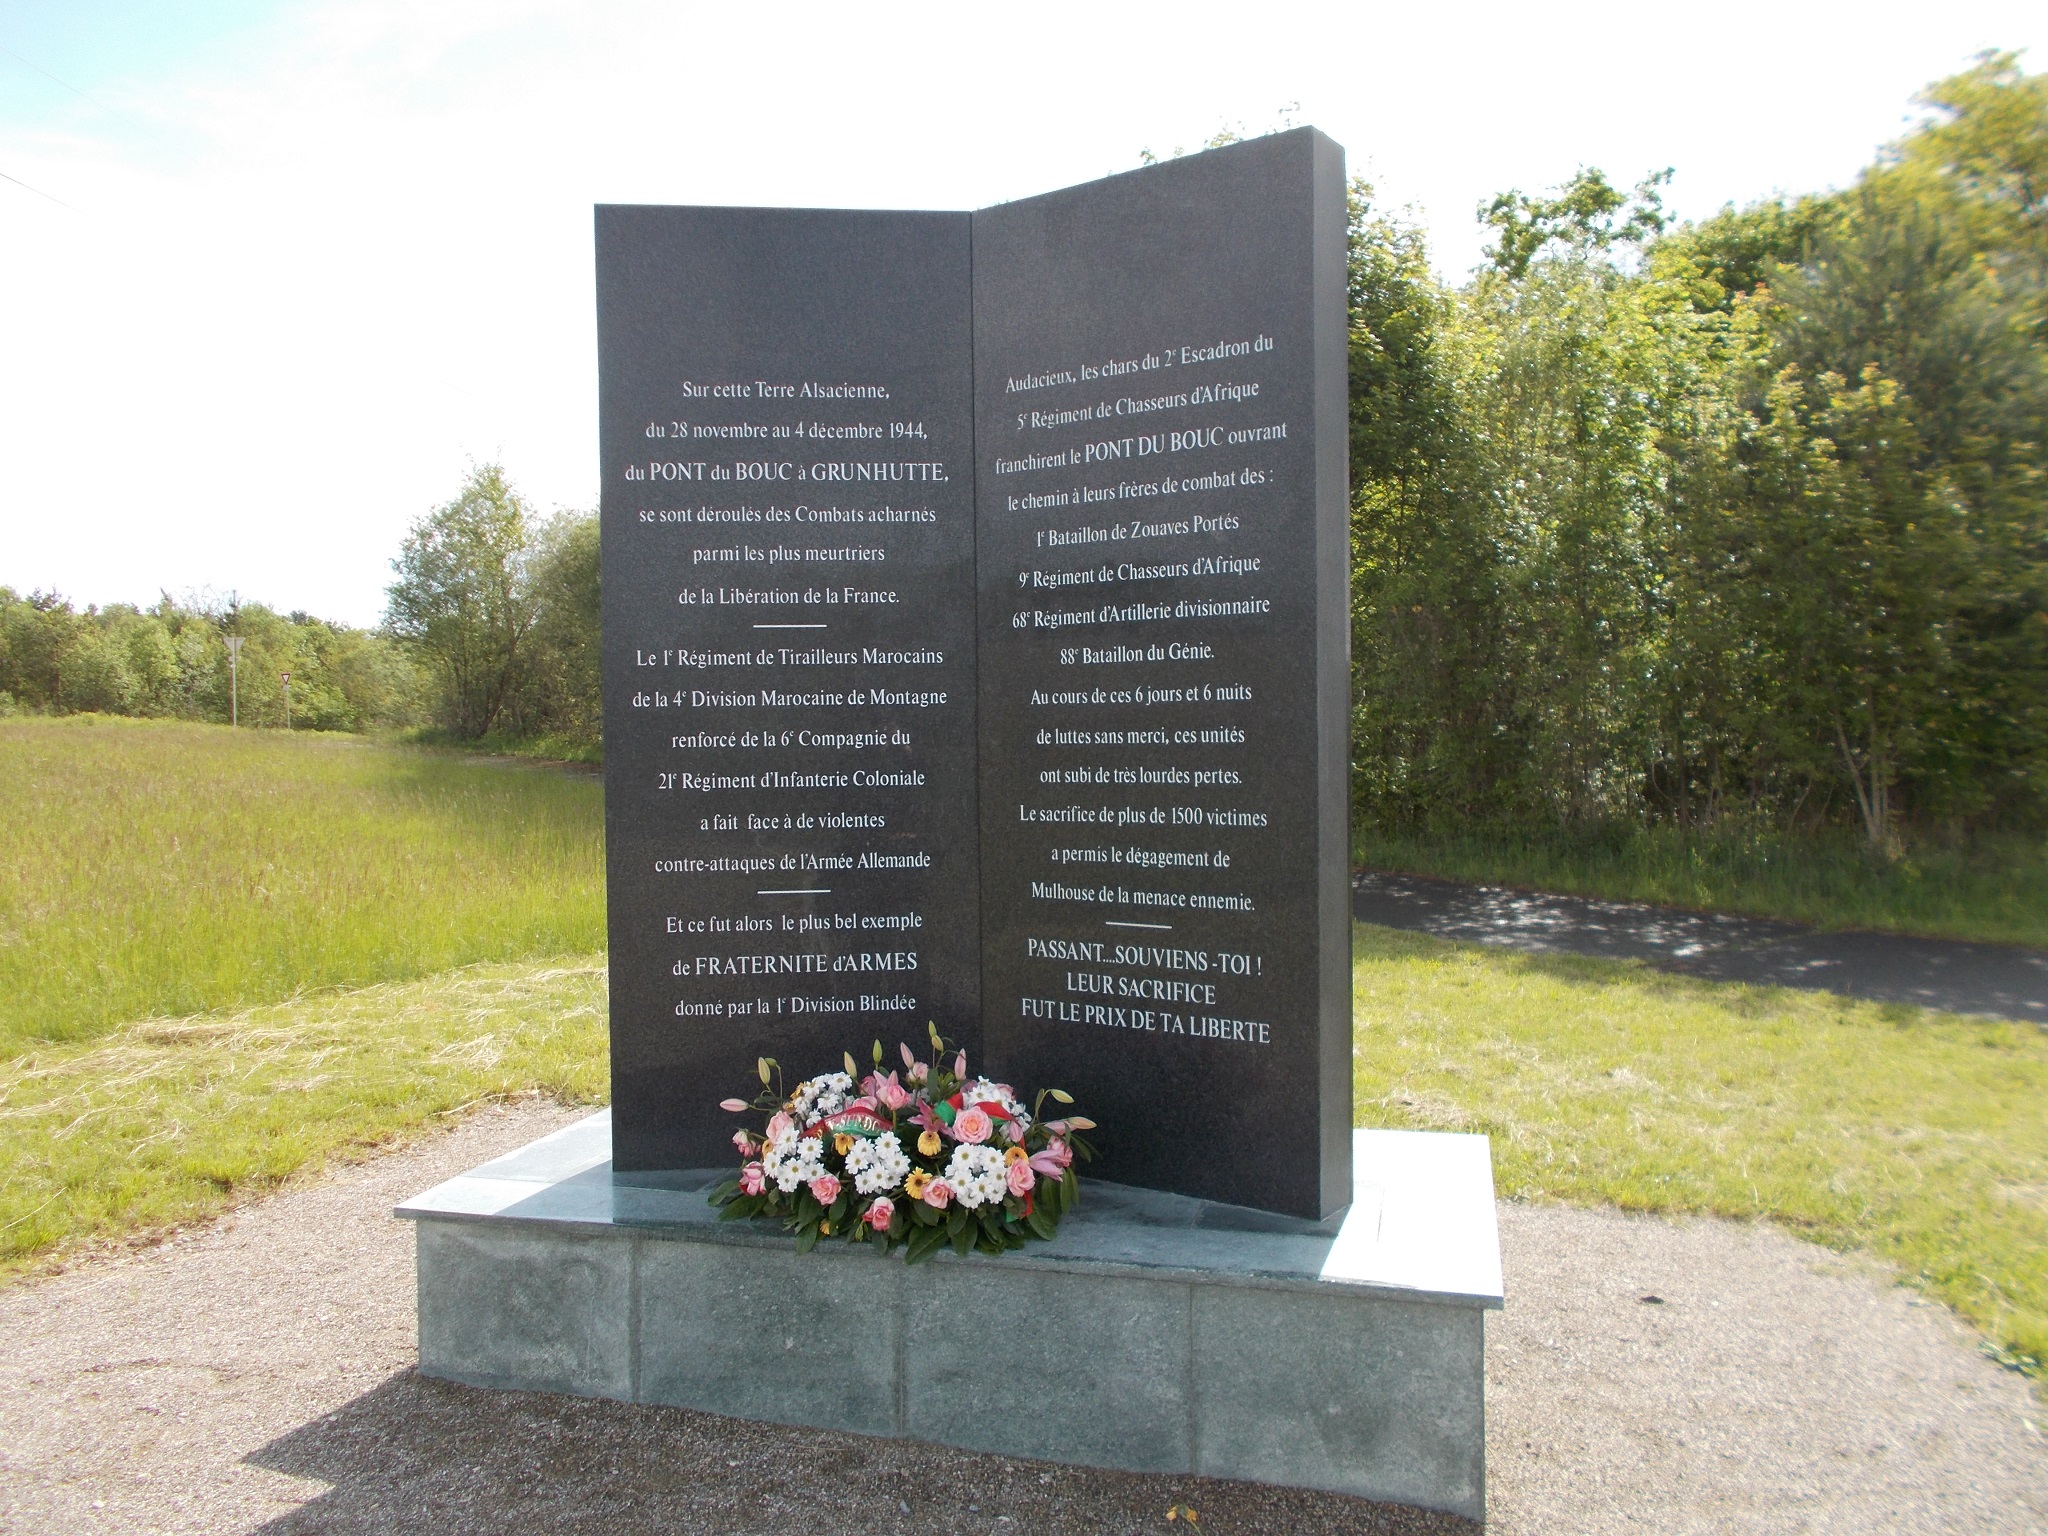 A memorial to fallen soldiers with a path and forest in the background.